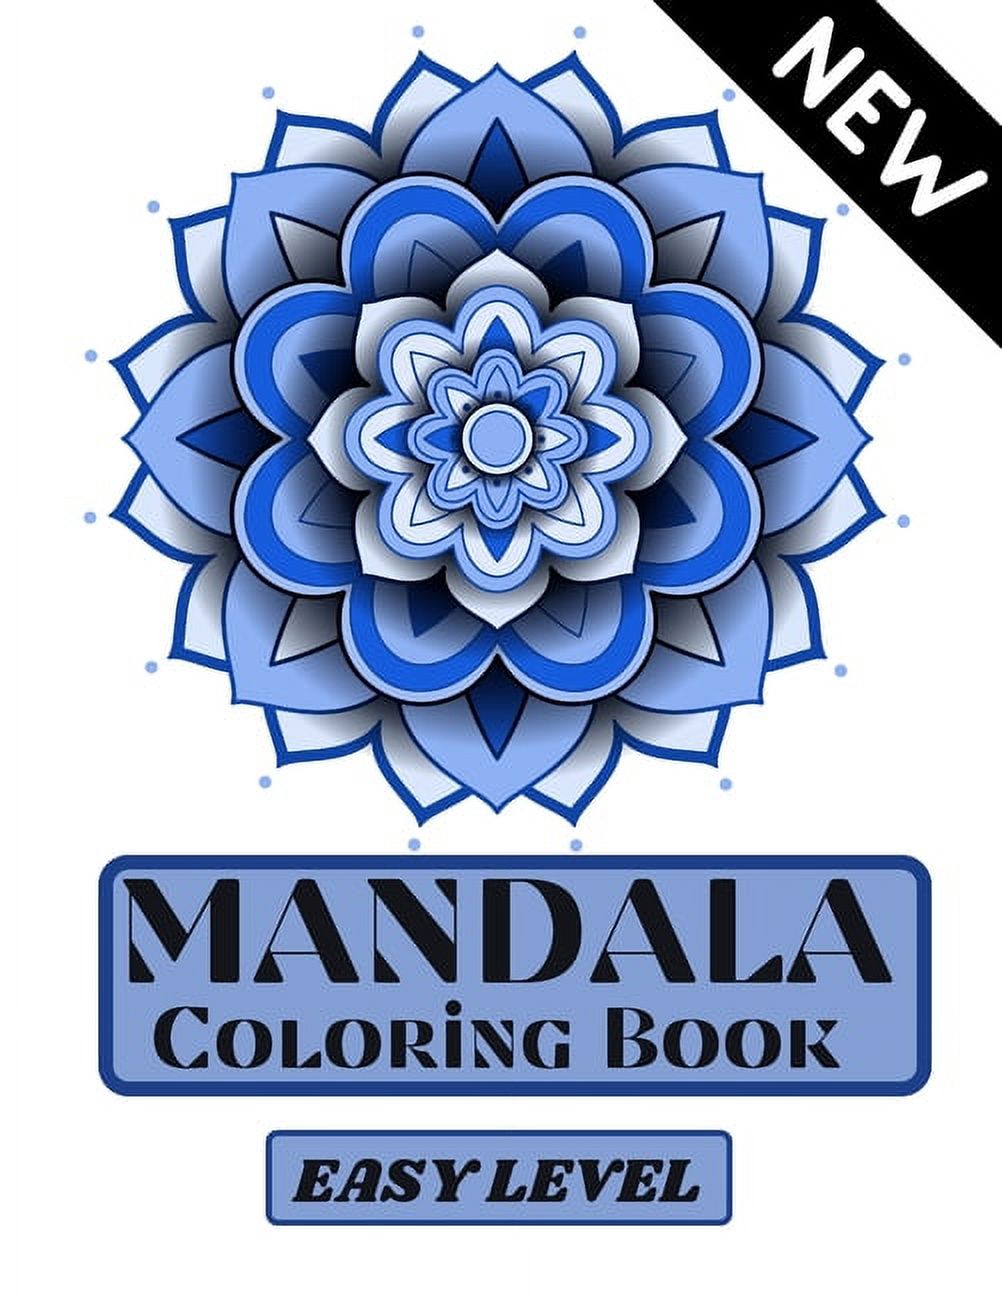 Mandala Coloring Book Easy Level: Easy Level Mandala- Easy Coloring- Coloring Pages for Relaxation and Stress Relief- Coloring Pages for Adults- Mandalas and Positive Words- Increasing Positive Emotions- 8.5x11 [Book]